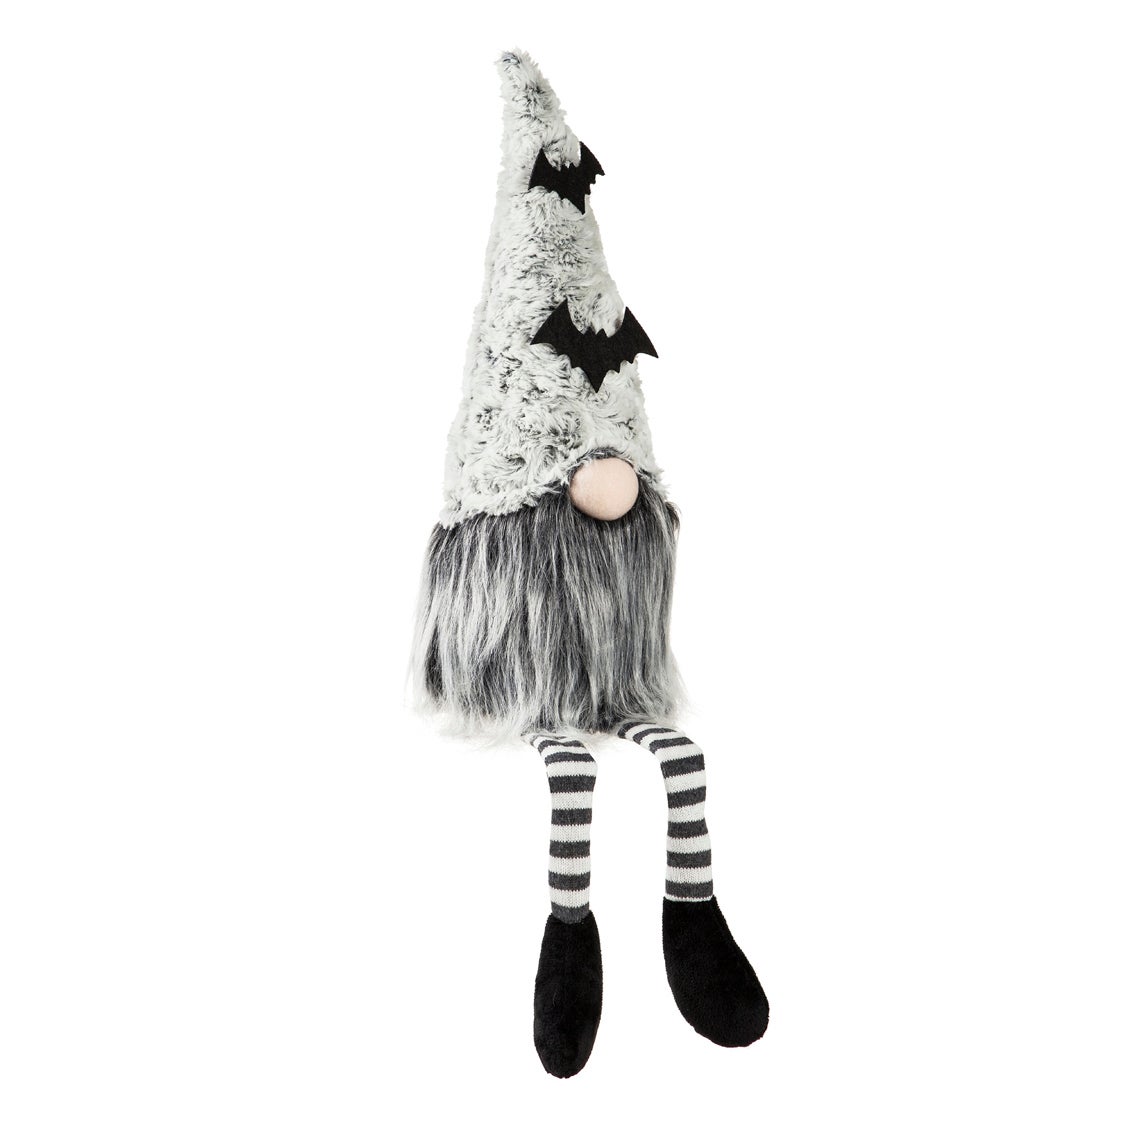 23" Fabric Sitting Gnome with Bat Hat and Striped Socks Table Décor